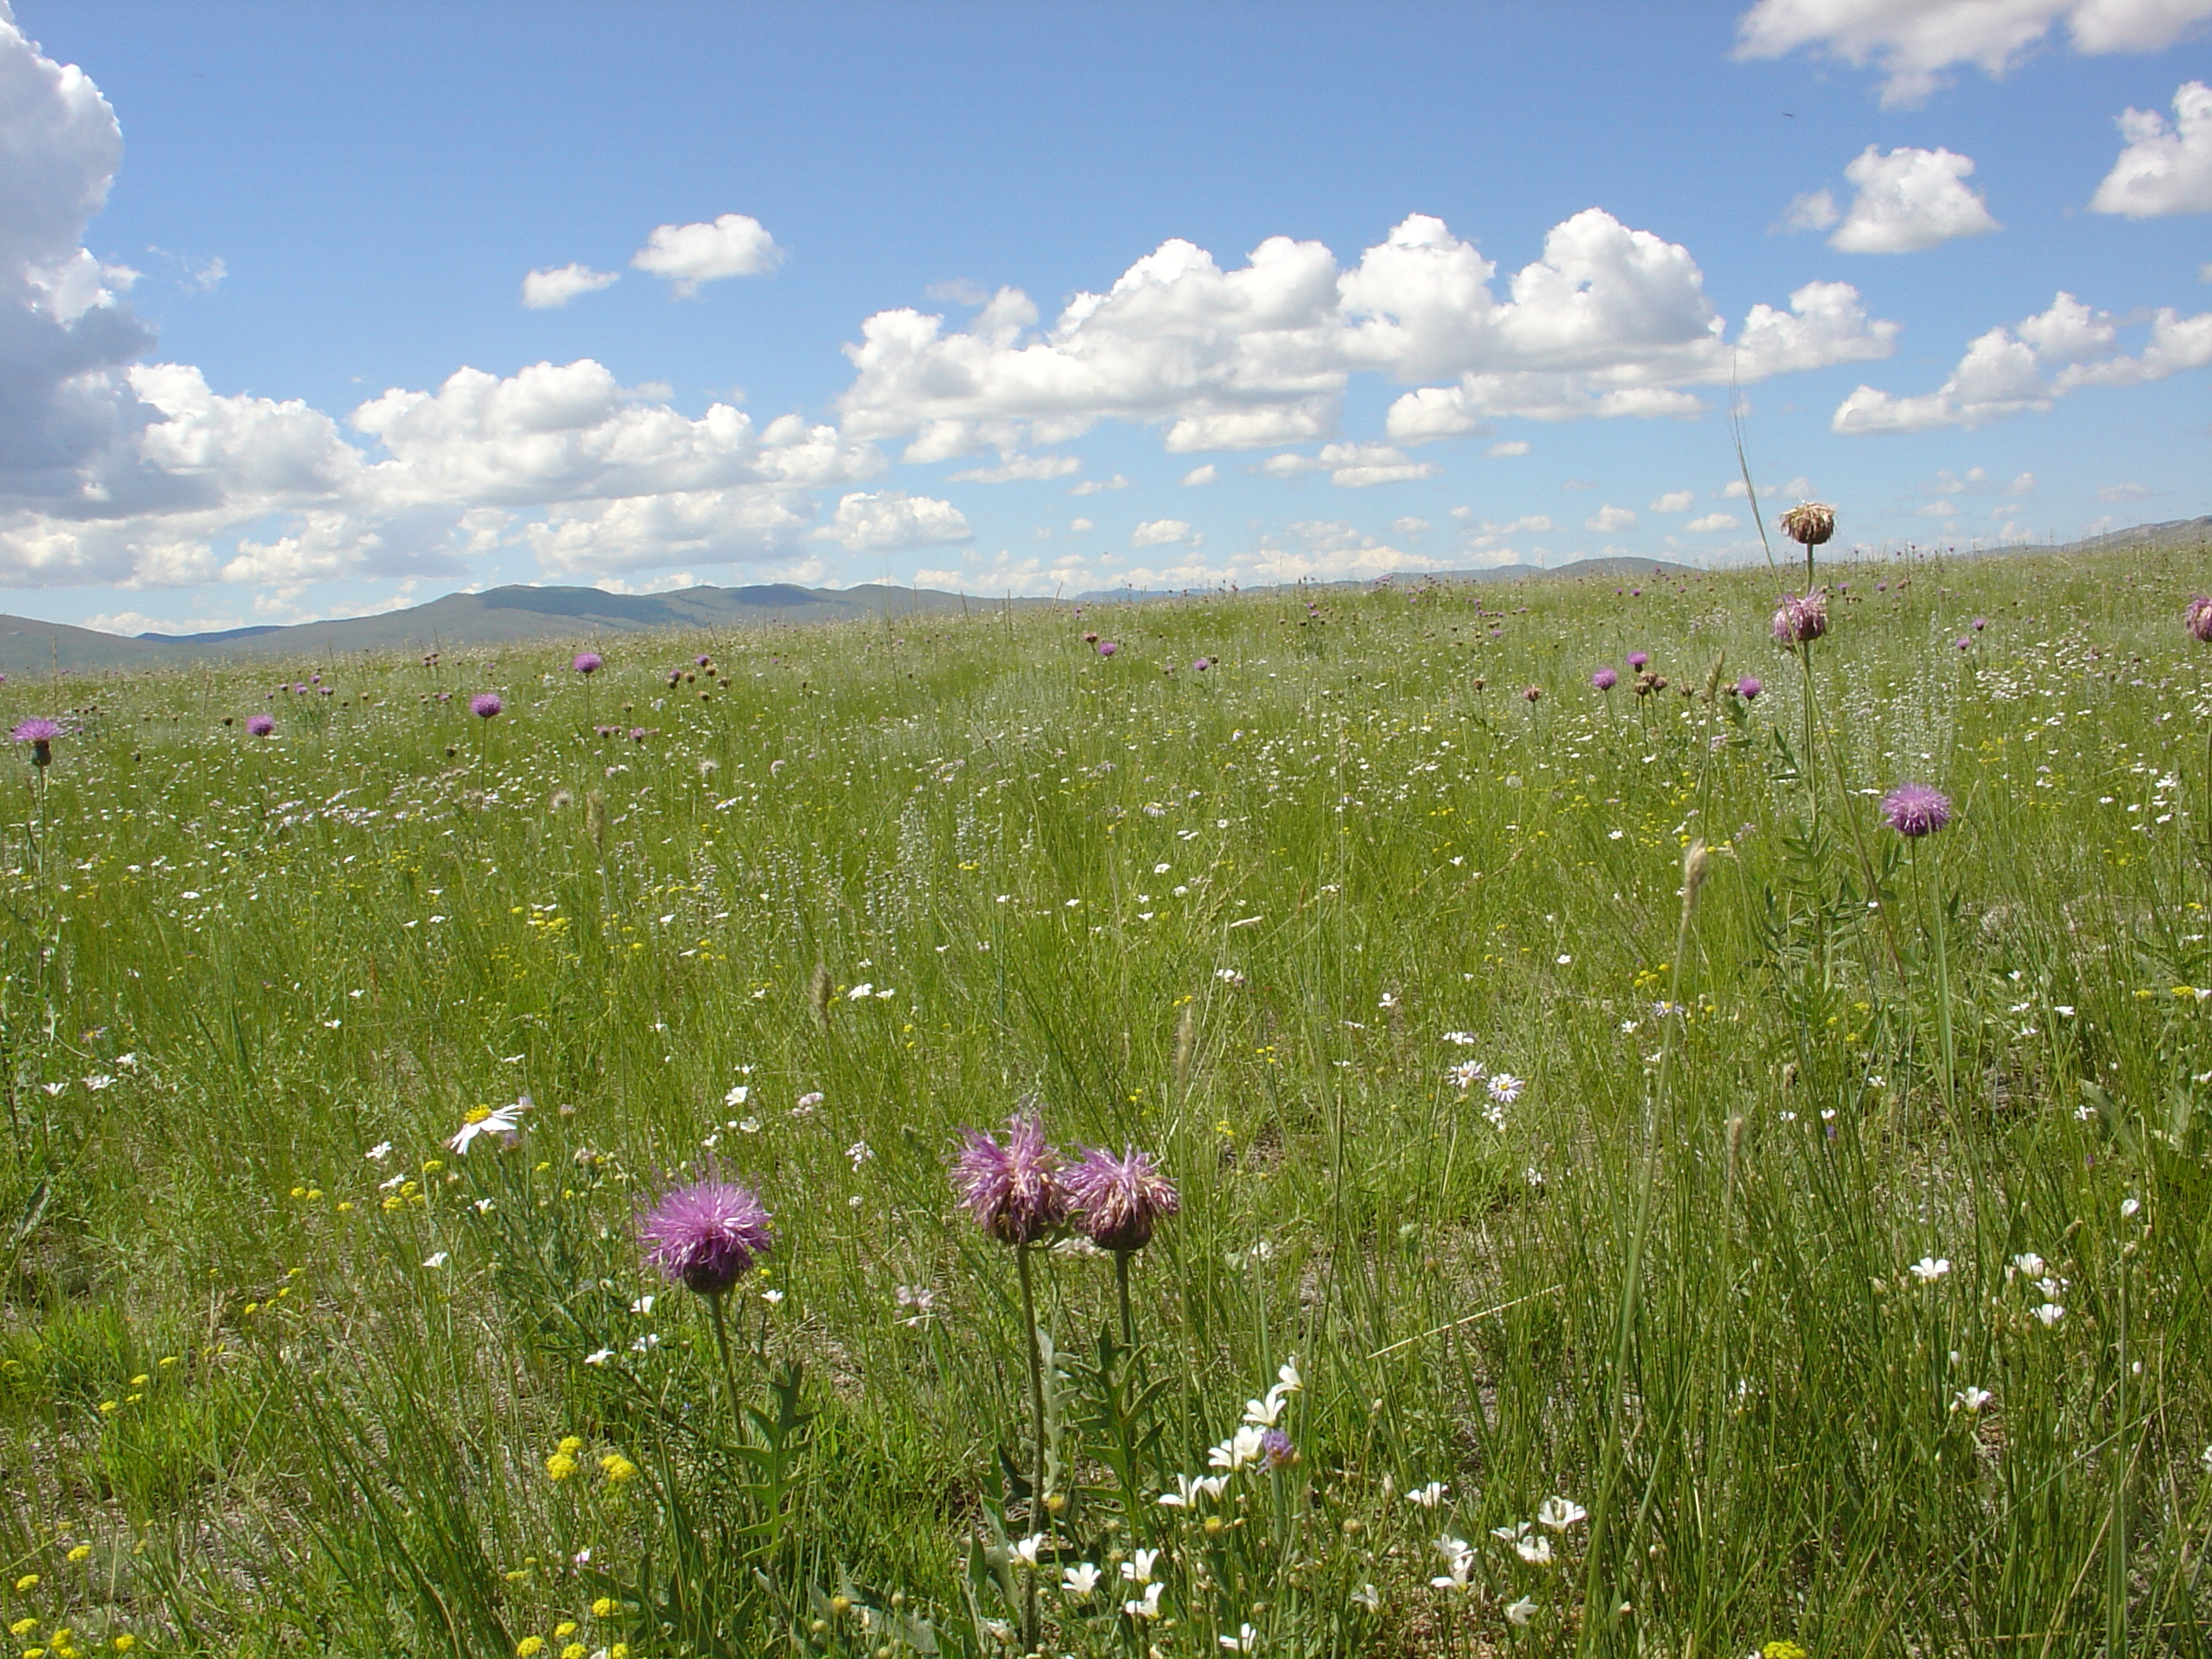 A beautiful view of the summer grasslands of Mongolia - taken on a blue sky day in the central Khangai Mountains